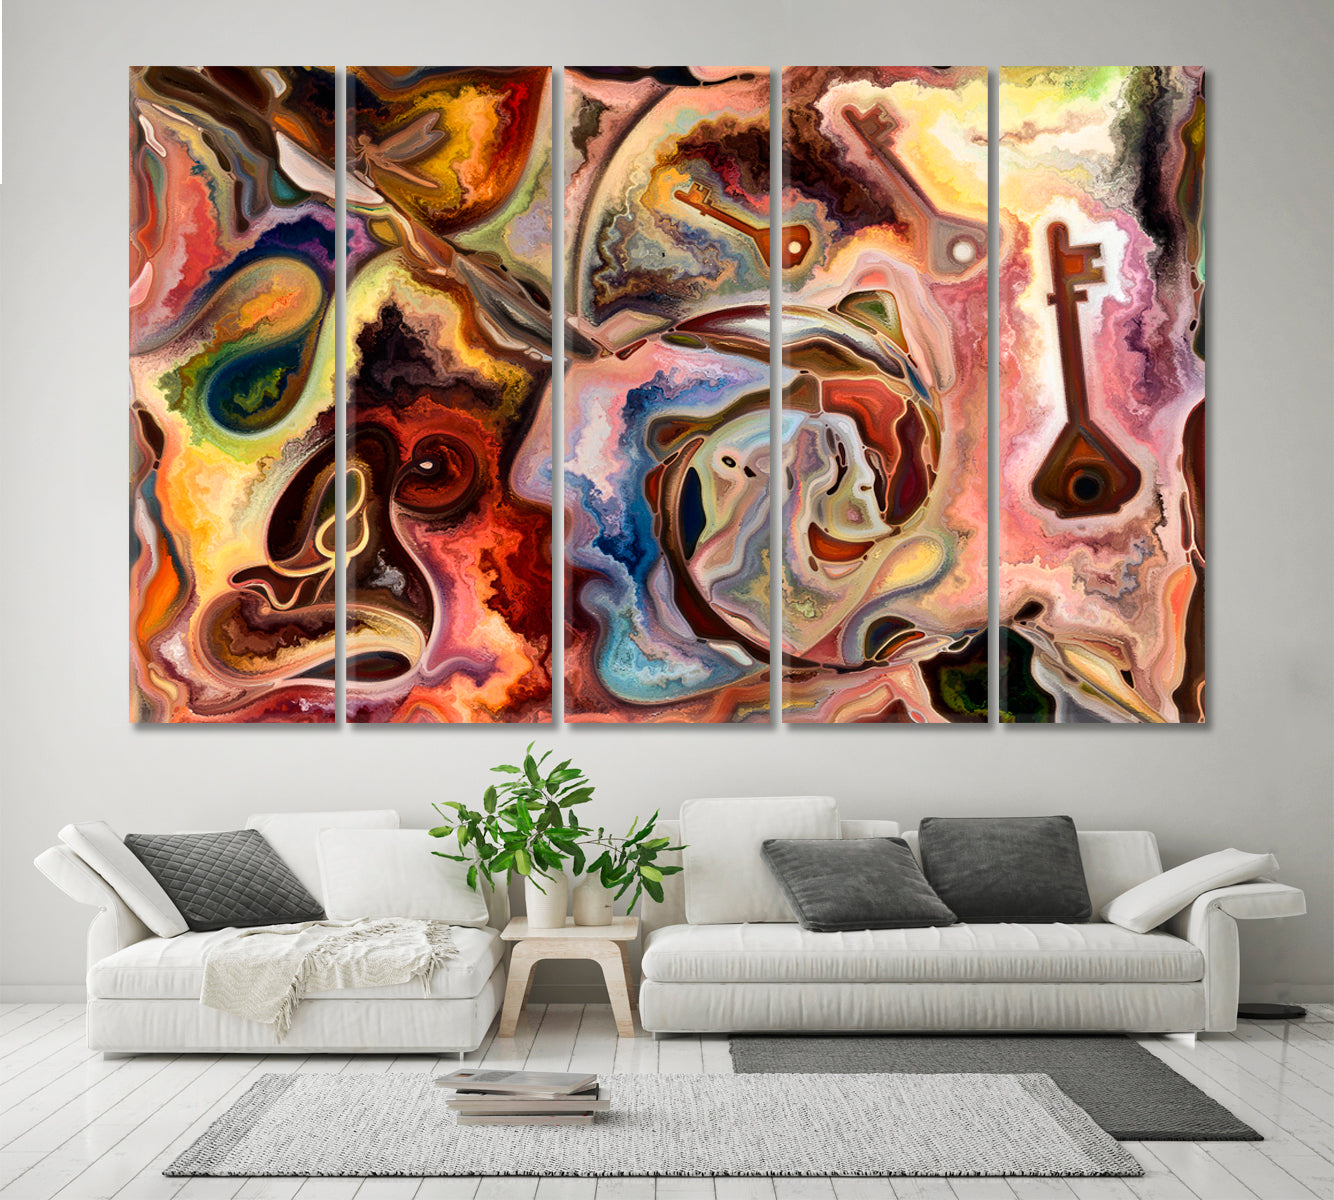 LOVE OF NATURE Abstract Contemporary Design Consciousness Art Artesty 5 panels 36" x 24" 